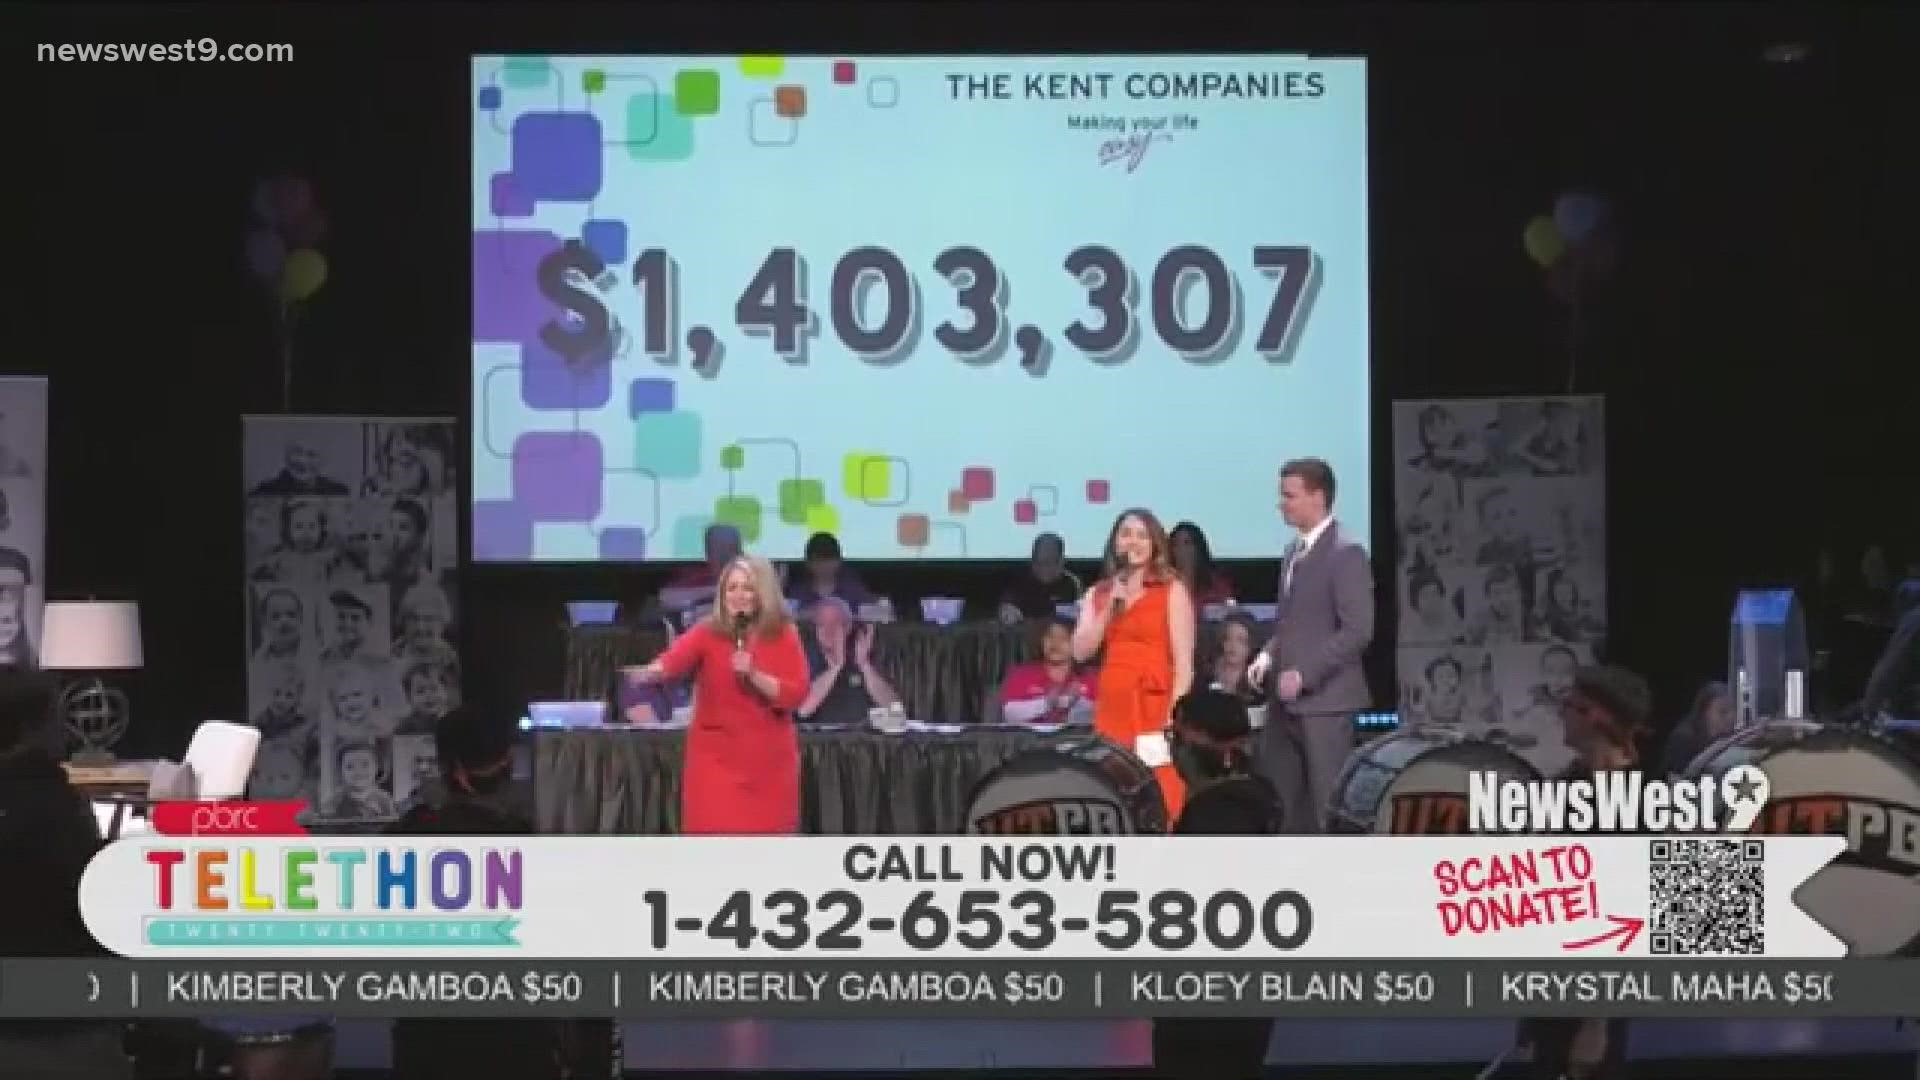 From all of us at NewsWest 9, thank you to everyone who helped make the 45th annual PBRC Telethon a huge success.